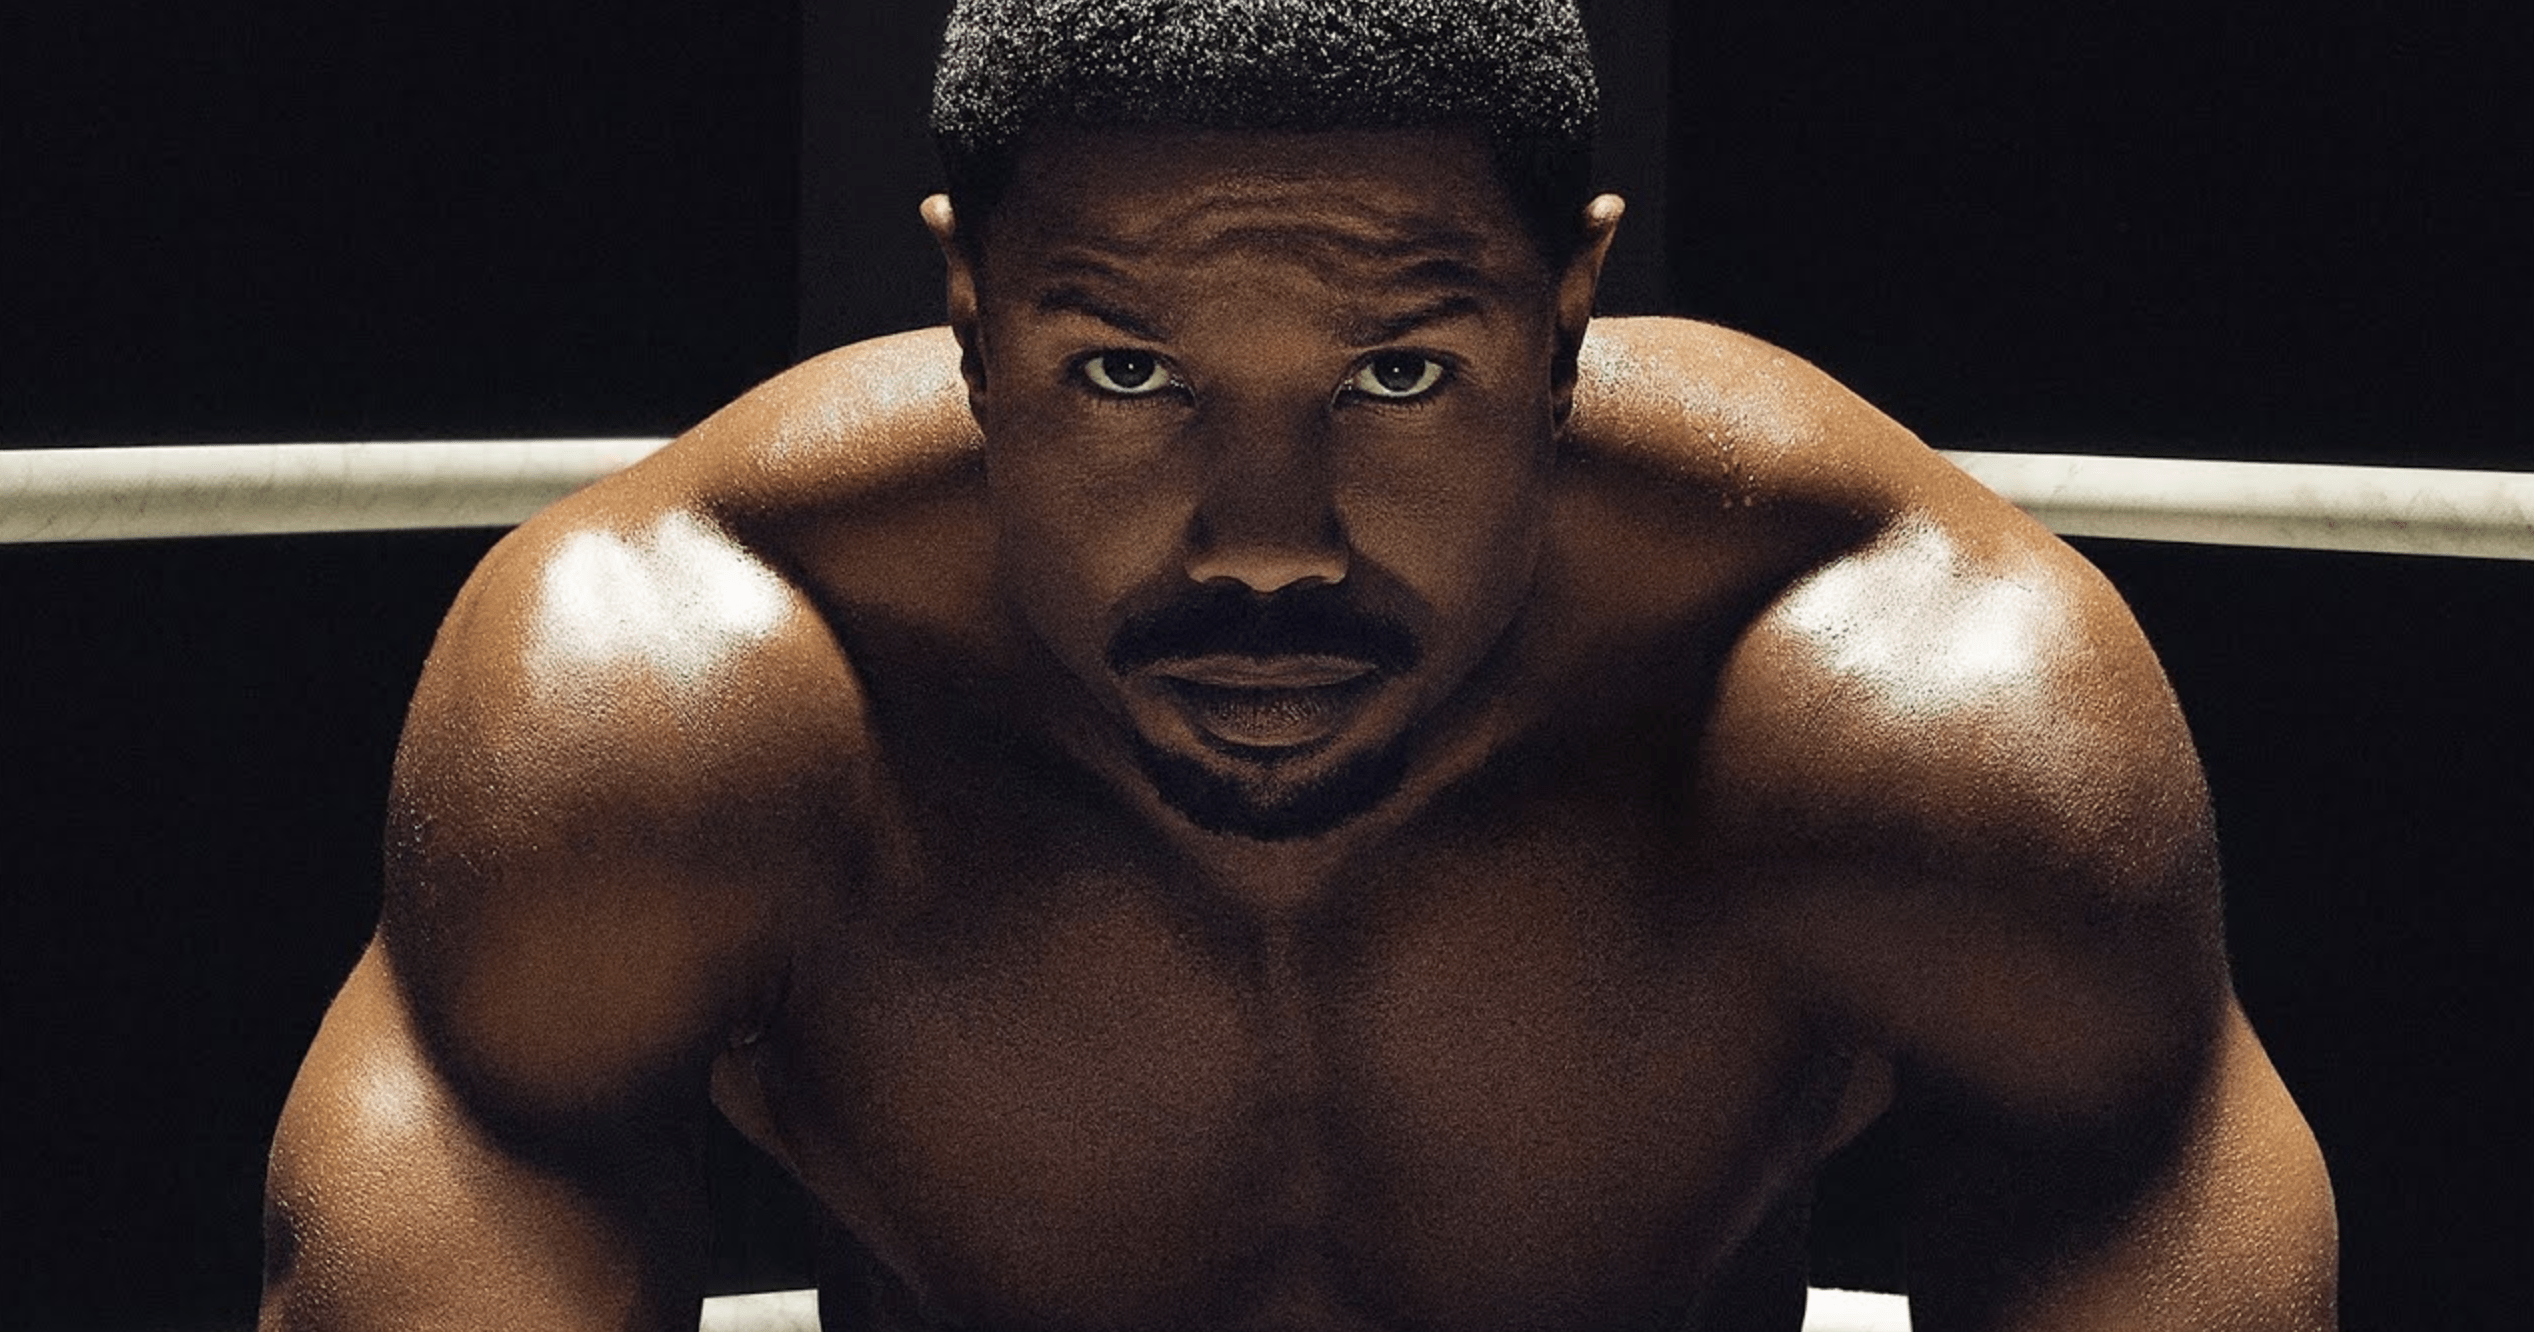 Close up of Michael B. Jordan's face as he sits shirtless in a boxing ring.